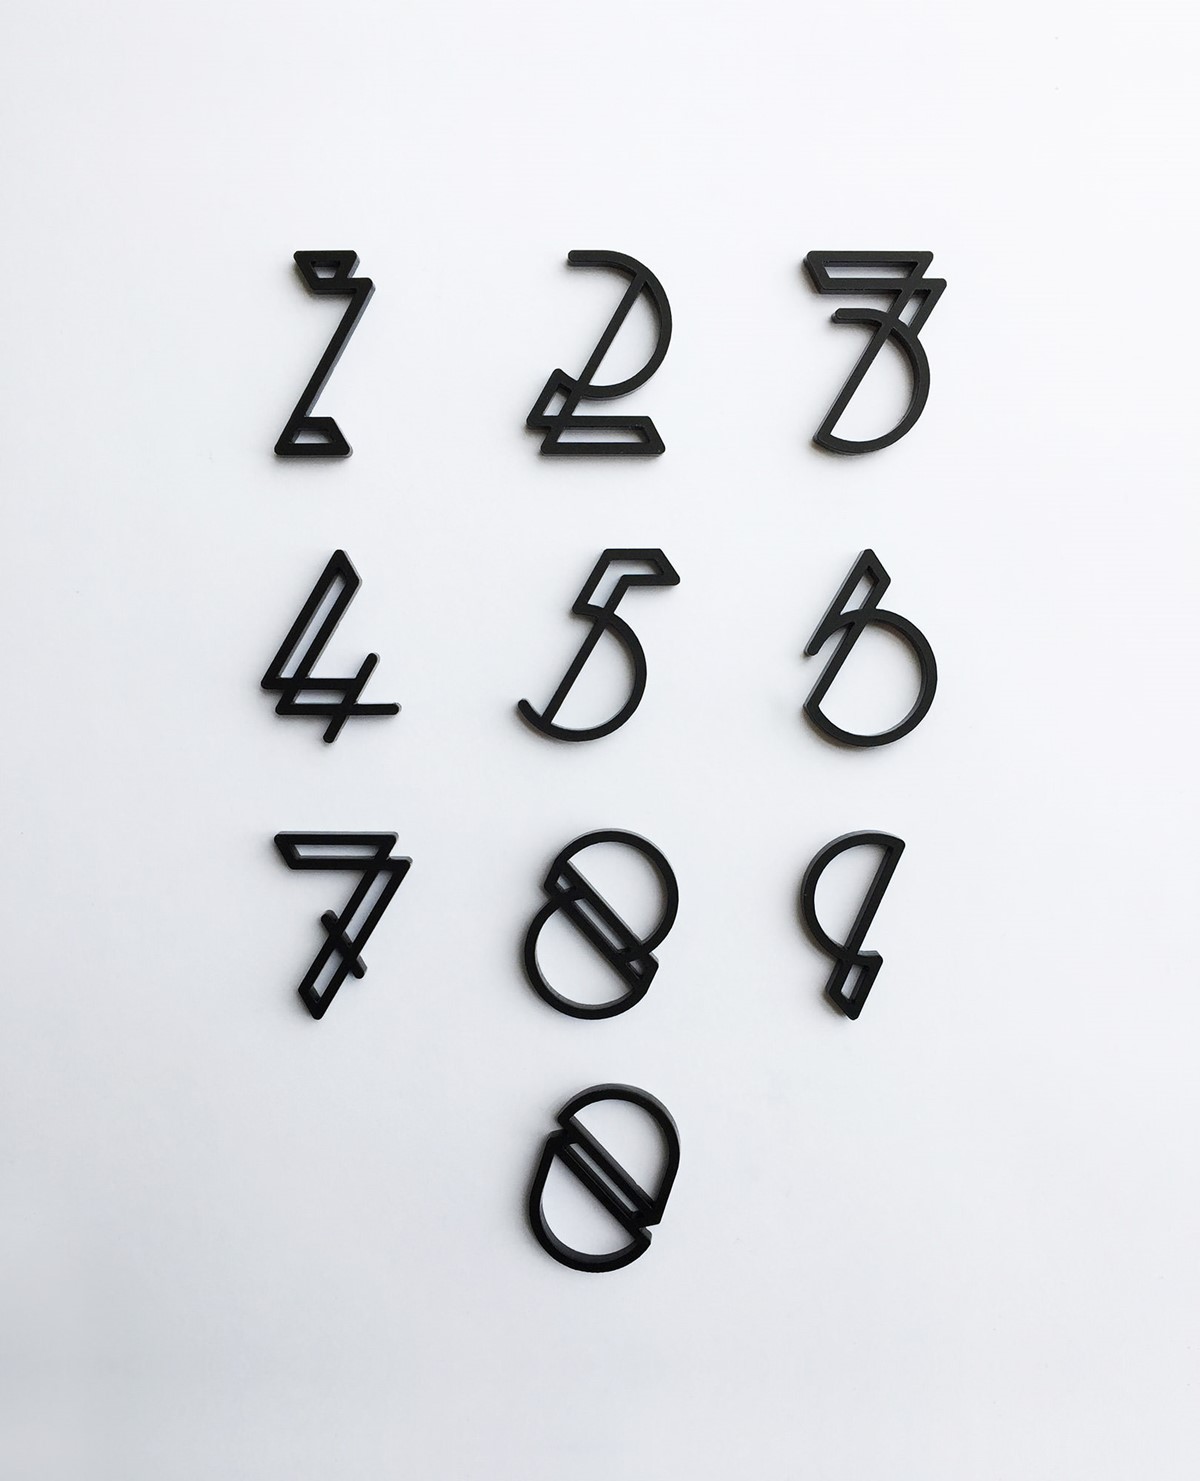 Flex. Fred Aldous. Experimental laser cut numerals. Typography design by Superfried.